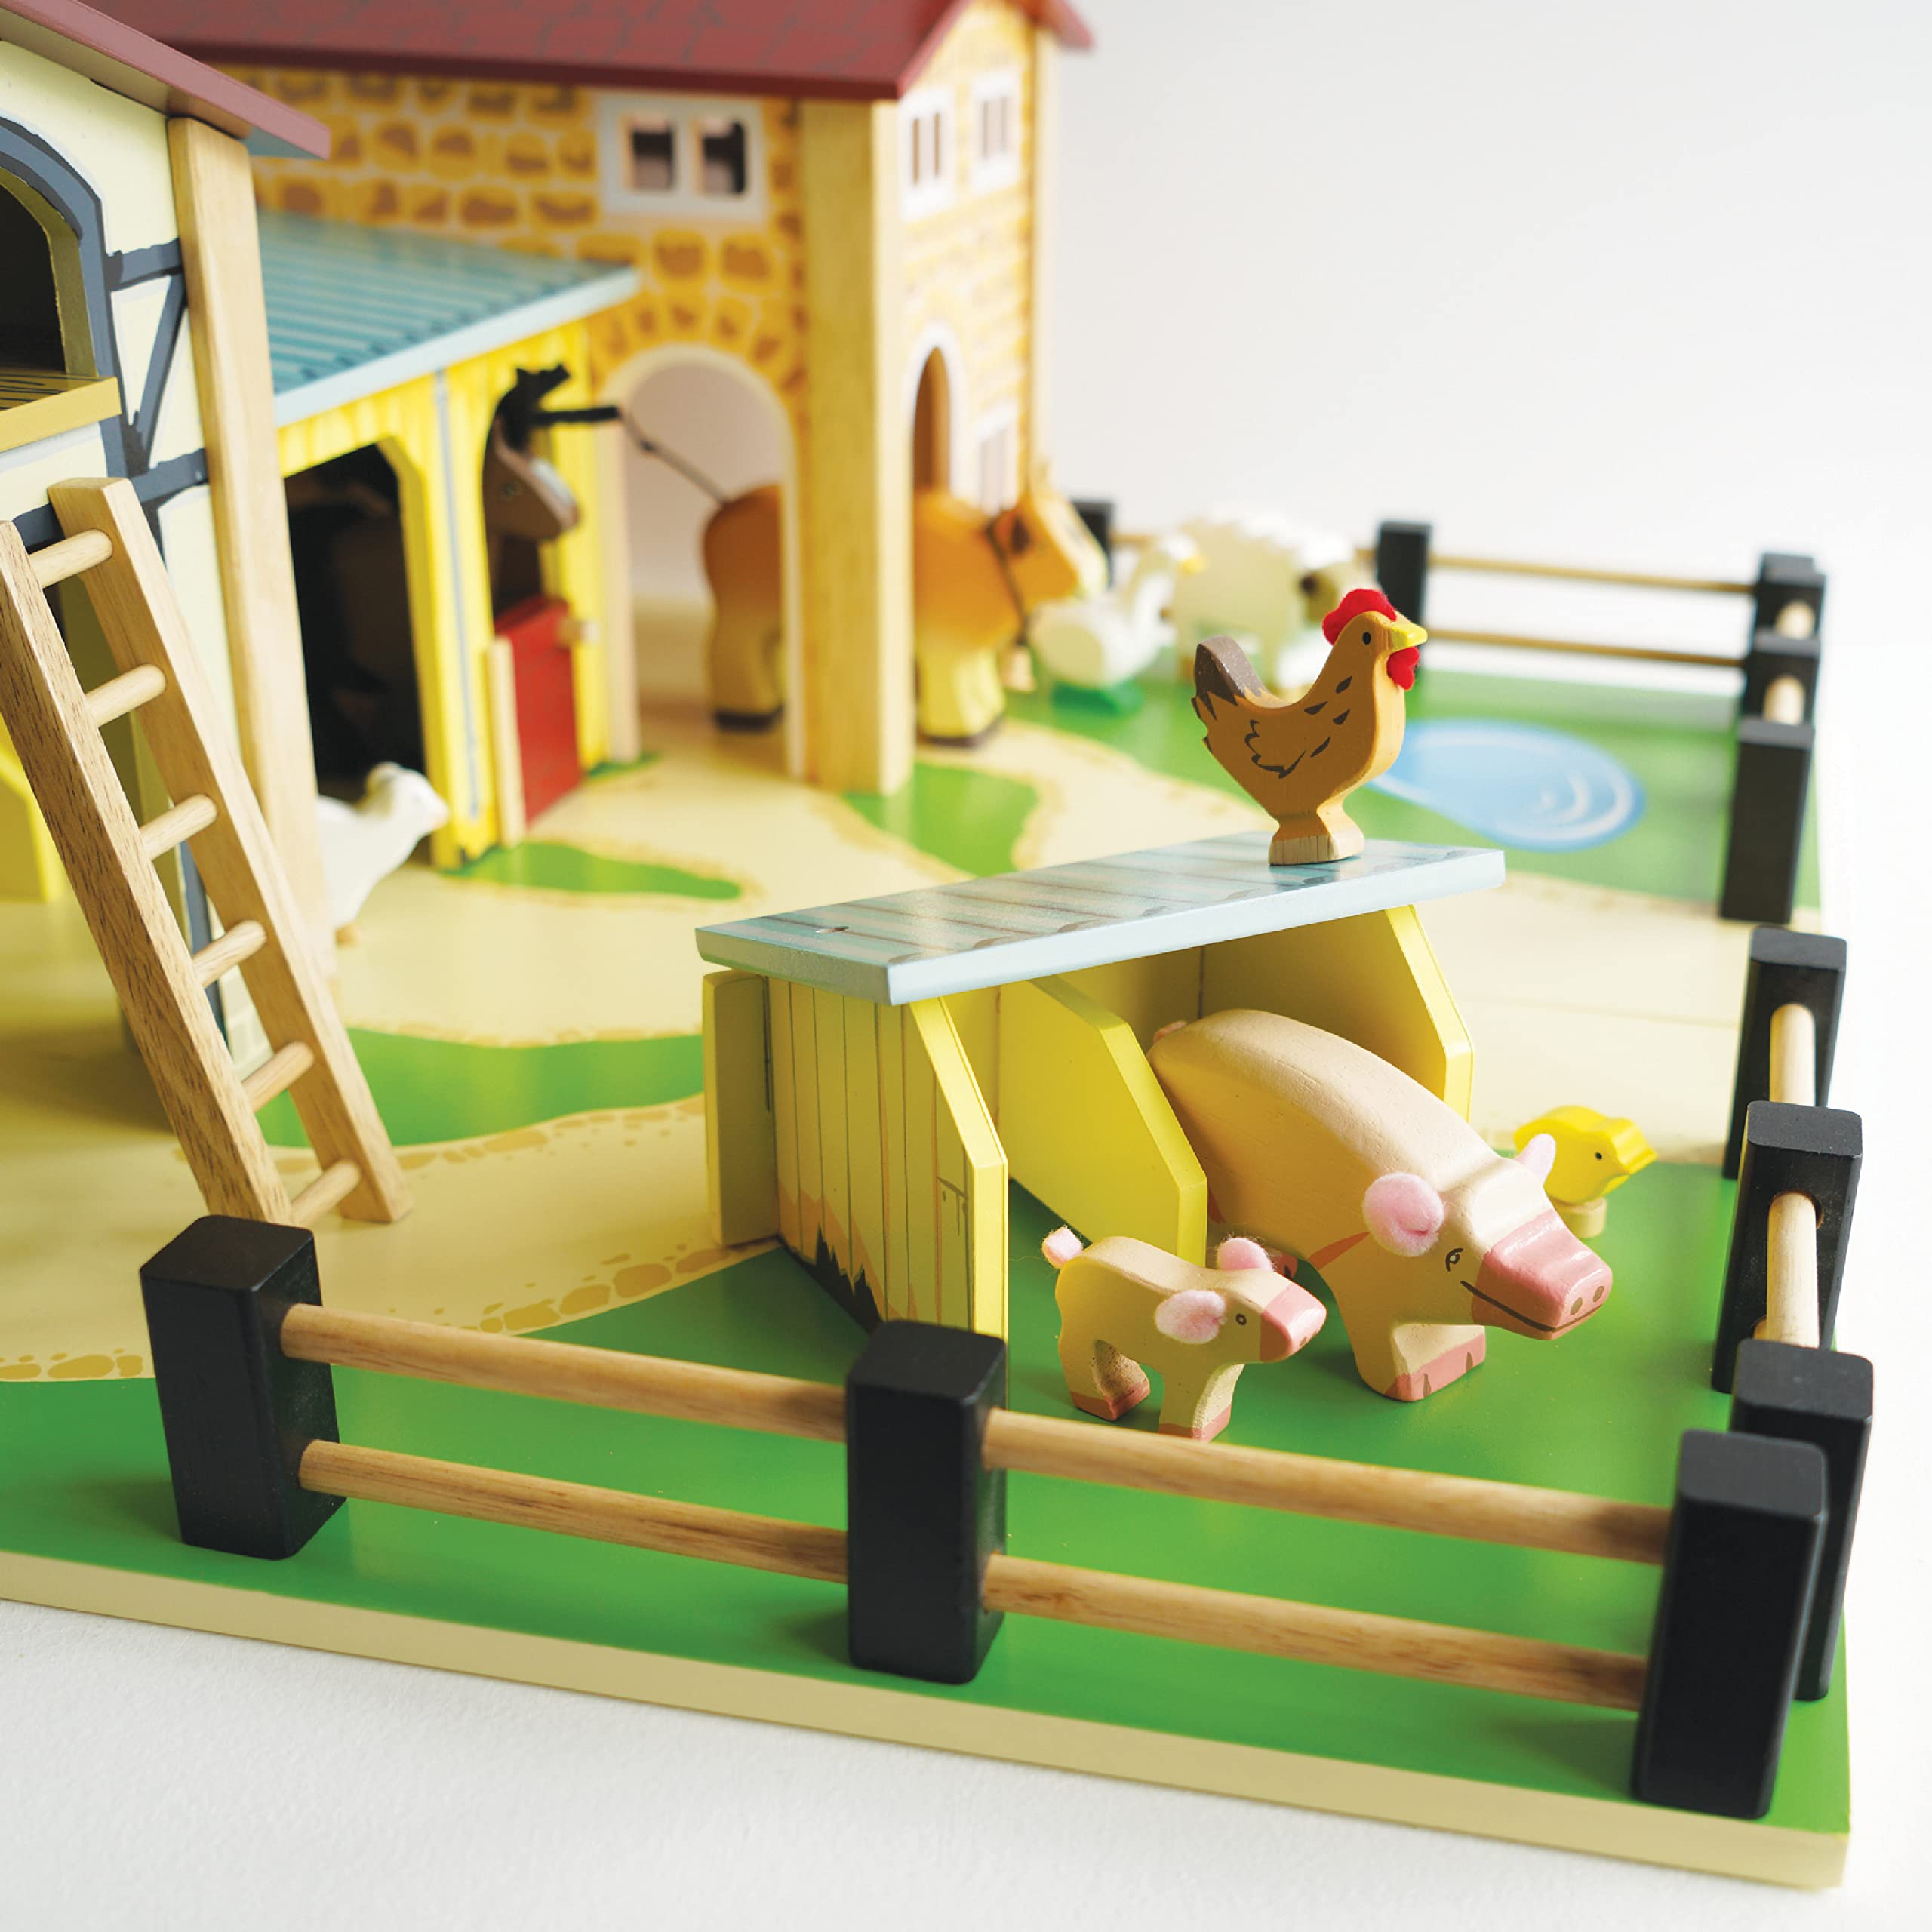 Le Toy Van - Educational Wooden Toy Colourful Wooden Farm Playset | Great Interactive Role Play Gifts for A Boy Or Girl - 3+ Years (TV410)